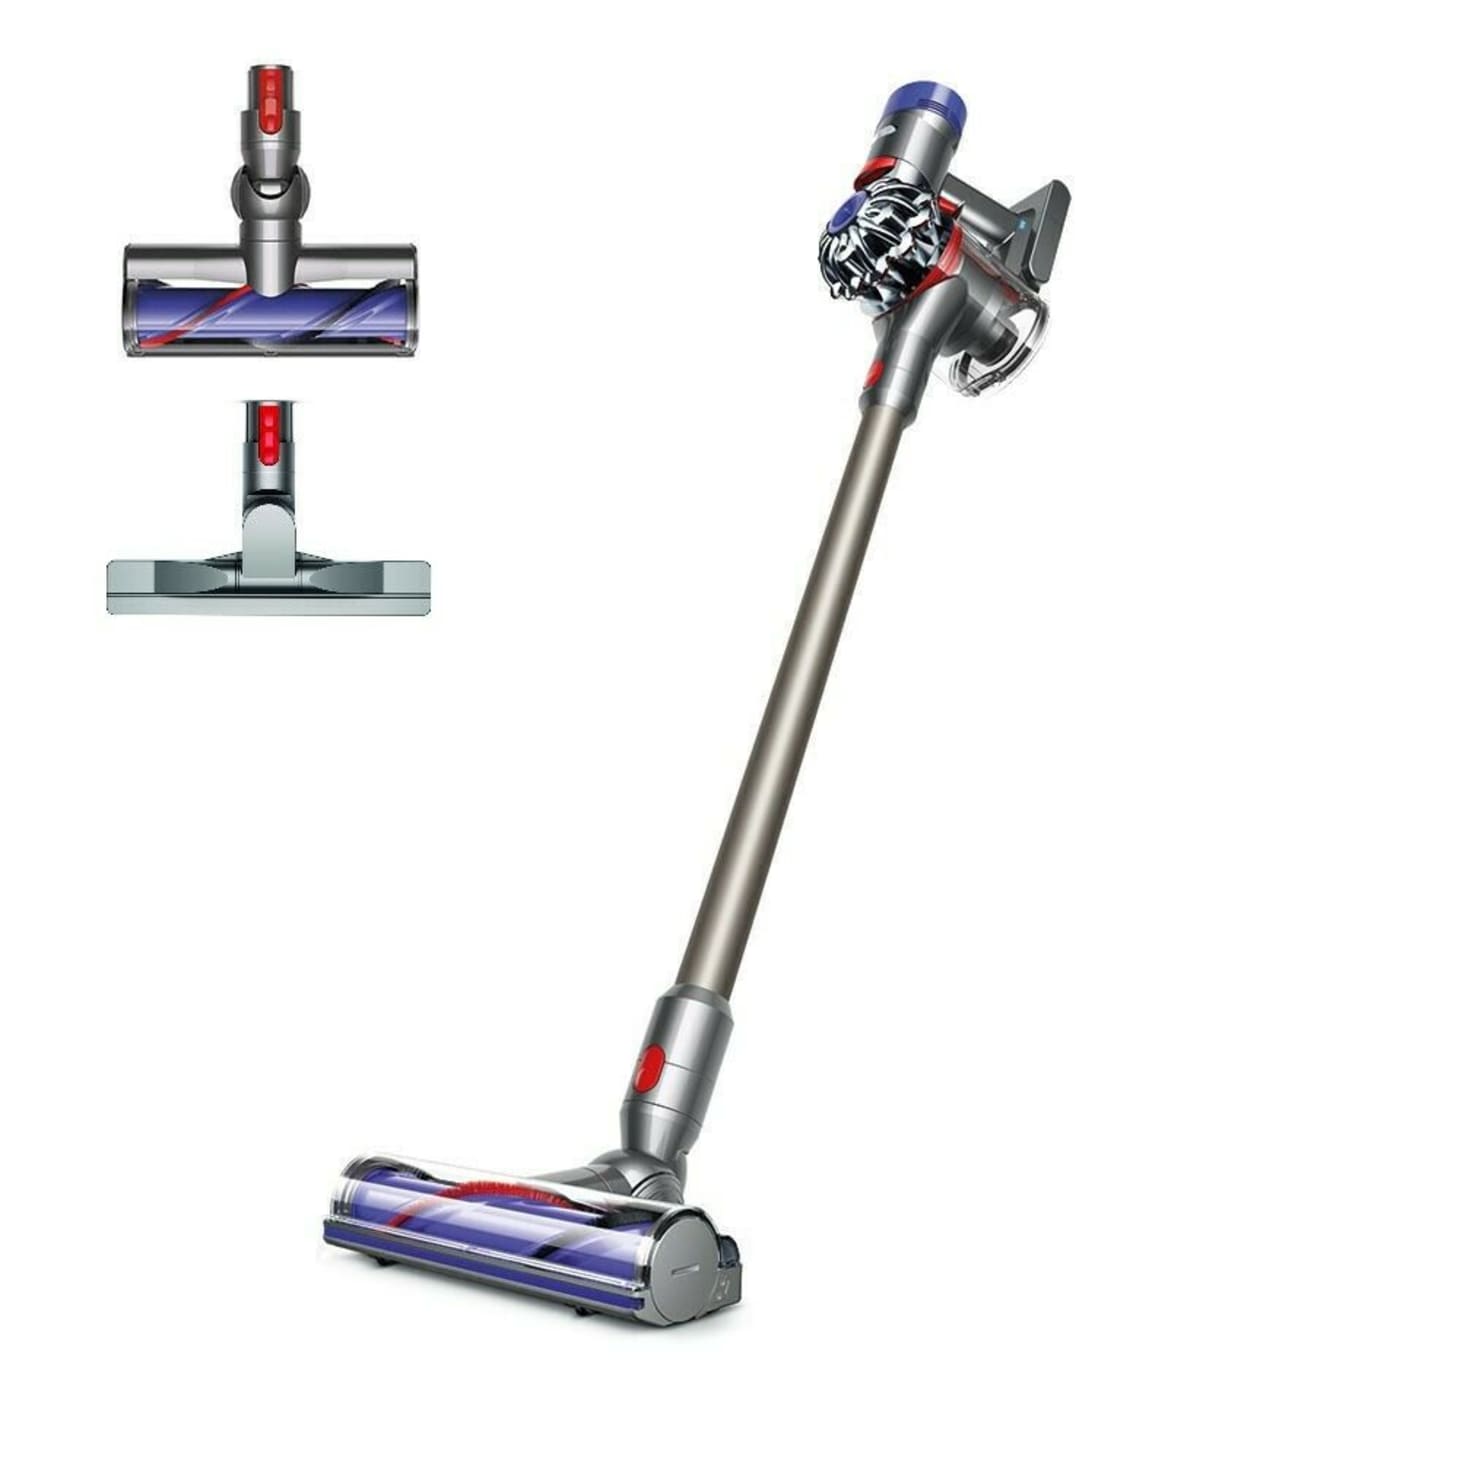 Best Black Friday Dyson Deals 2019 | Apartment Therapy